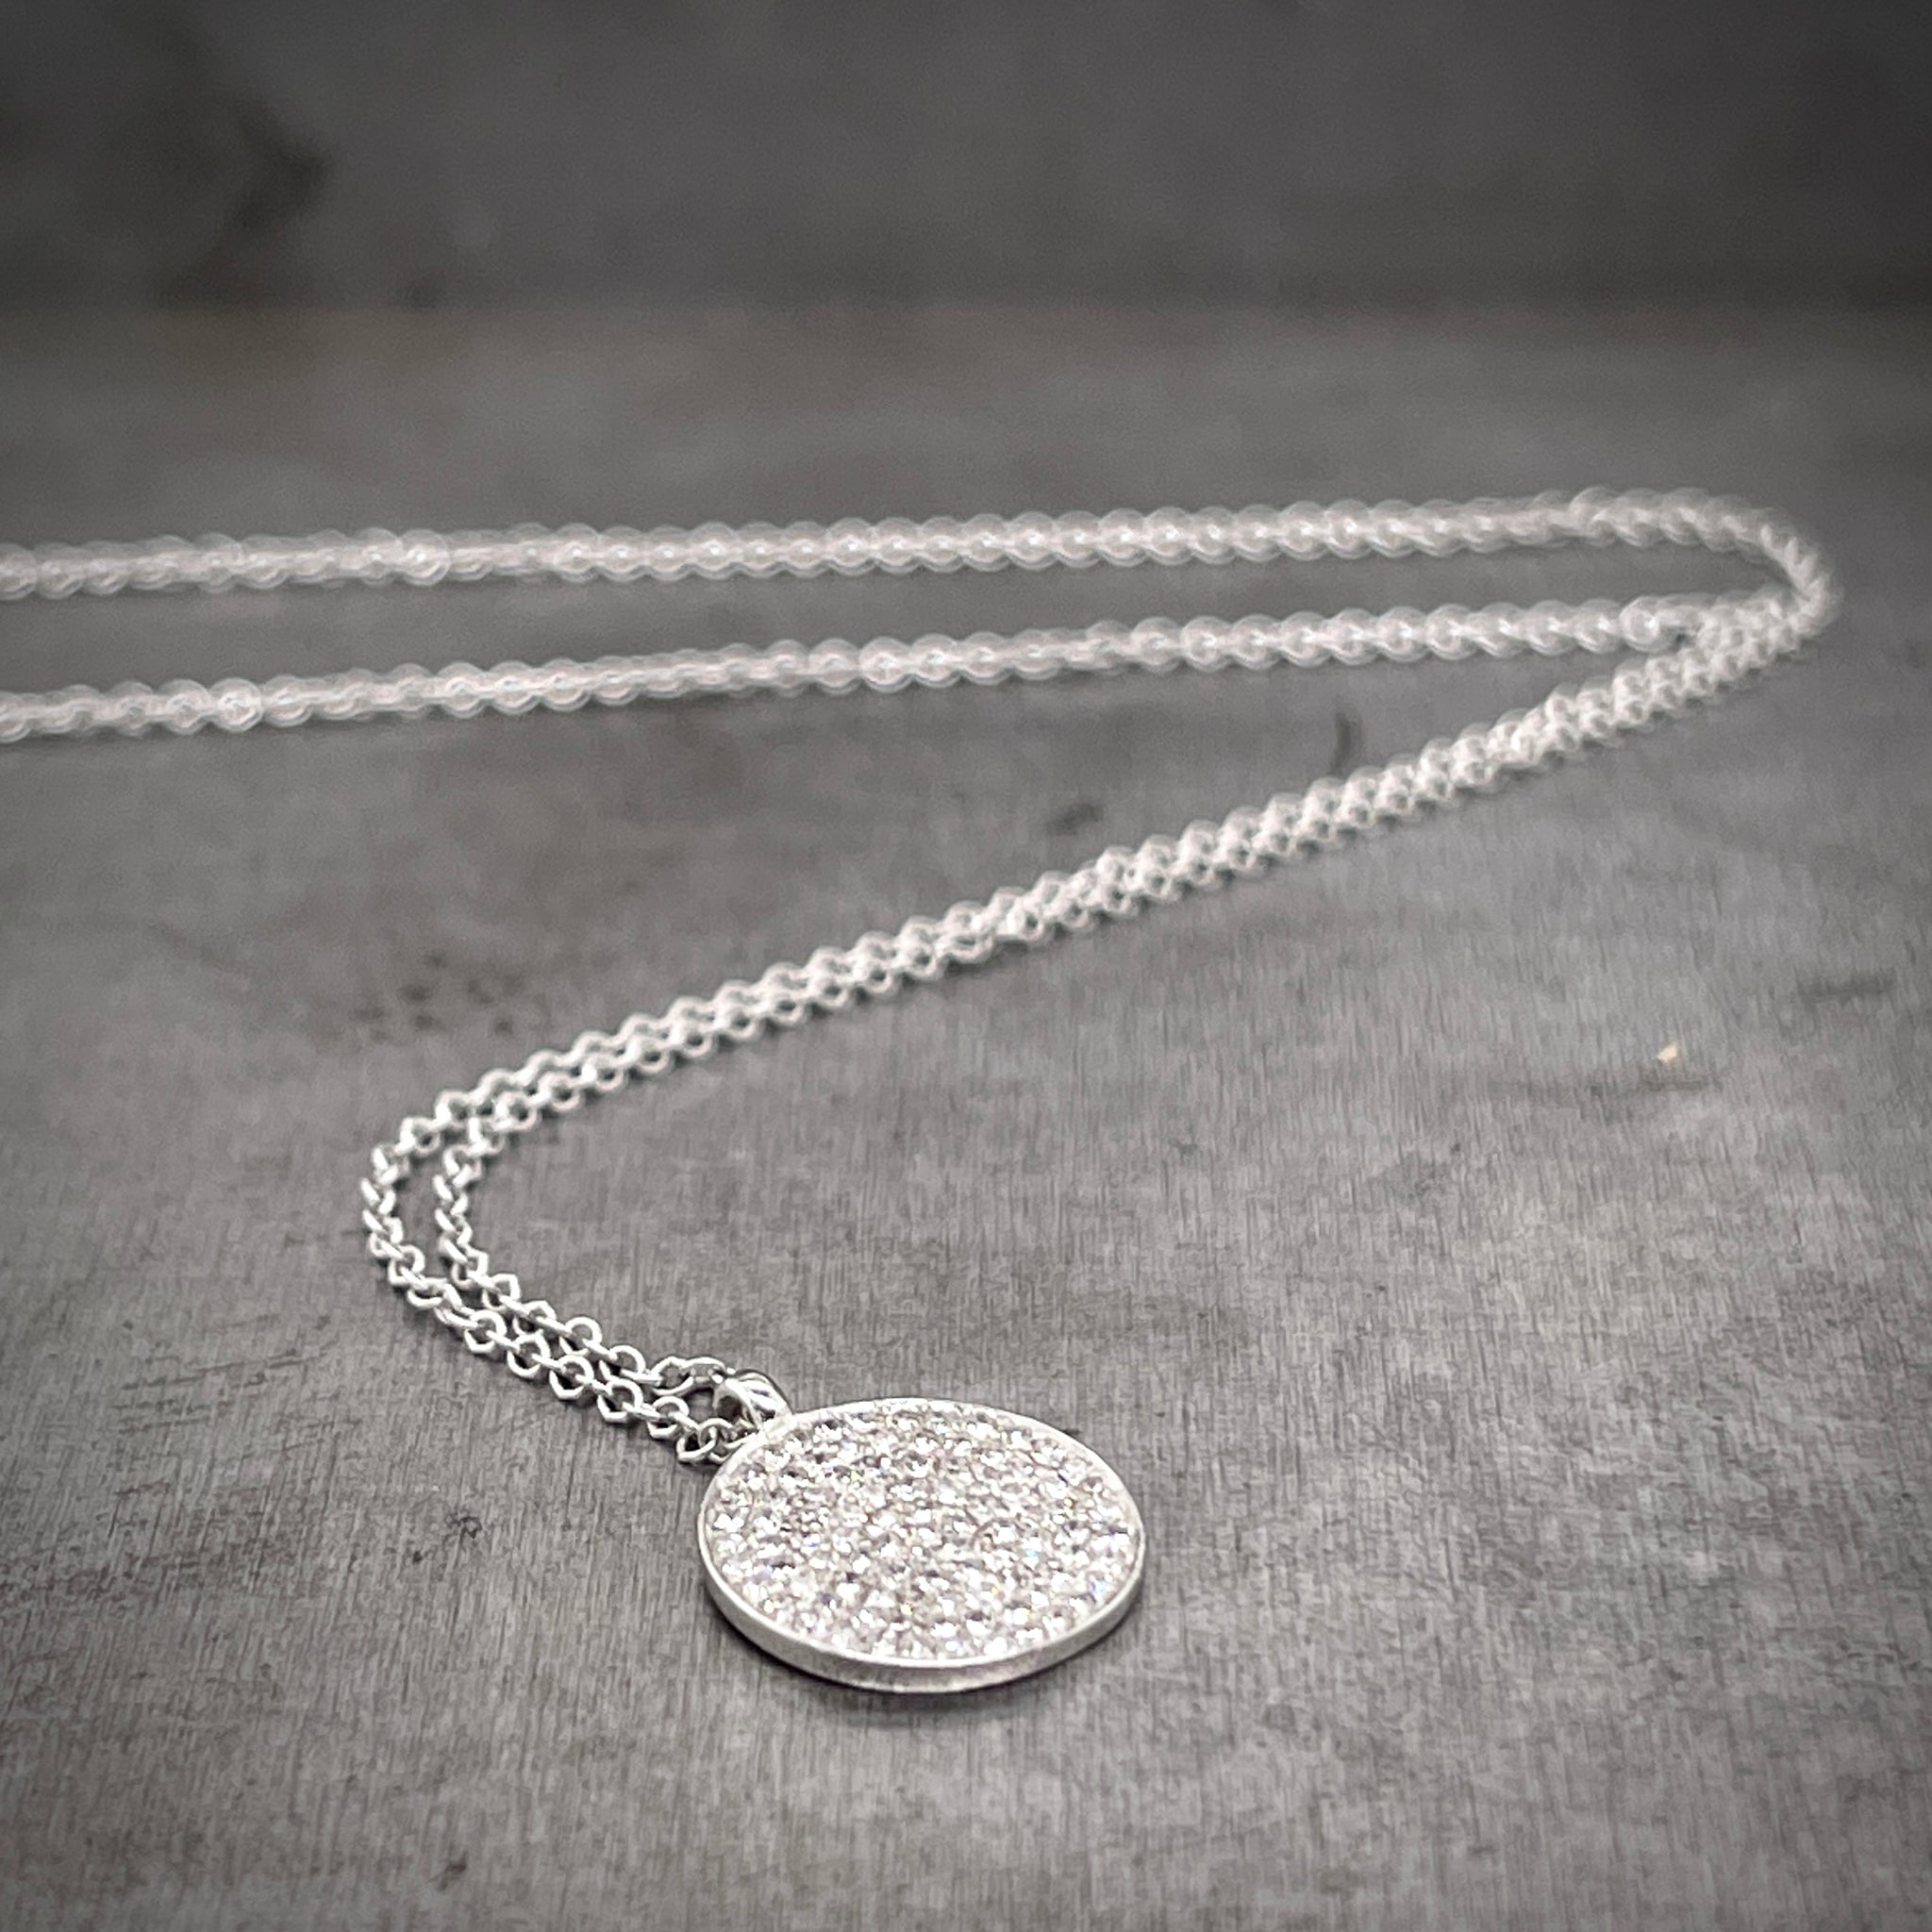 Full view of Diamond Disc Pendant laying on gray background with its chain twisting in the background.